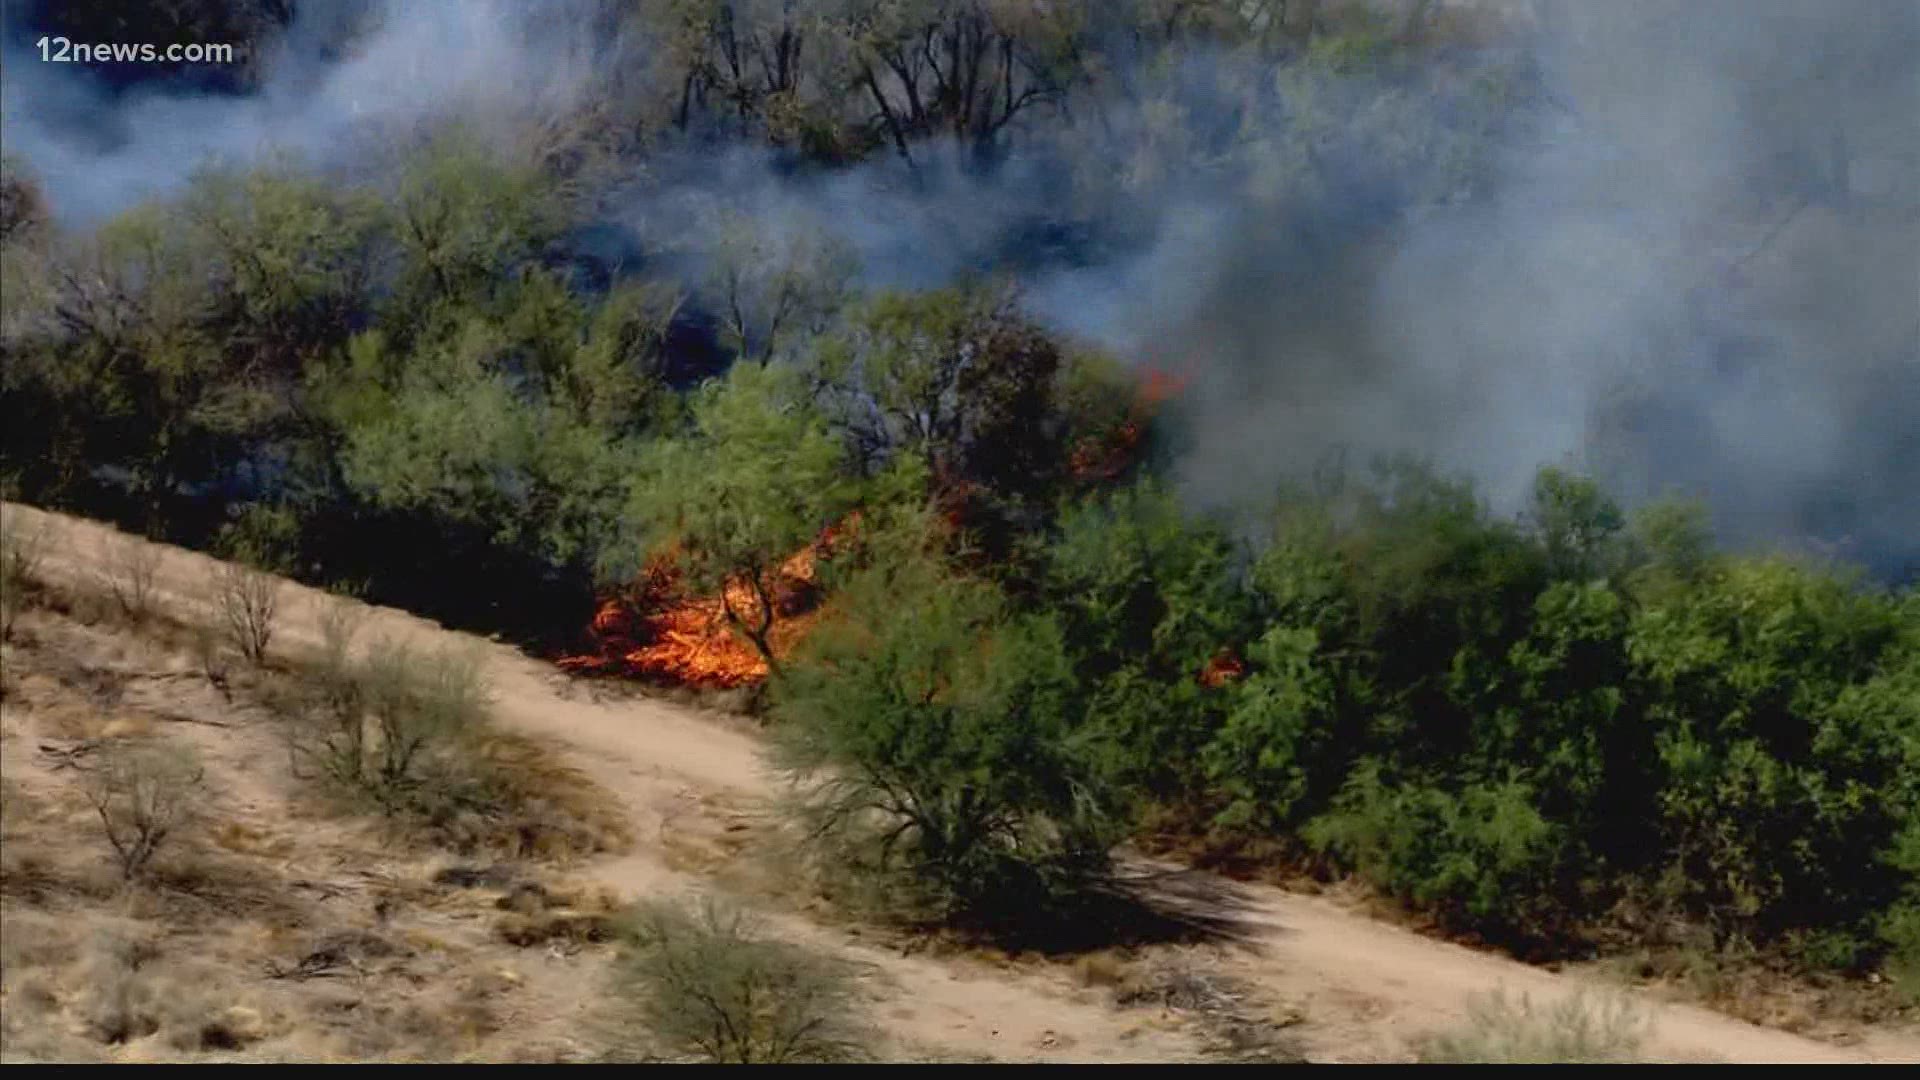 Fire crews from multiple jurisdictions are battling a brush fire that began Friday afternoon near Loop 101 and State Route 51. Approximately 40 acres have burned.